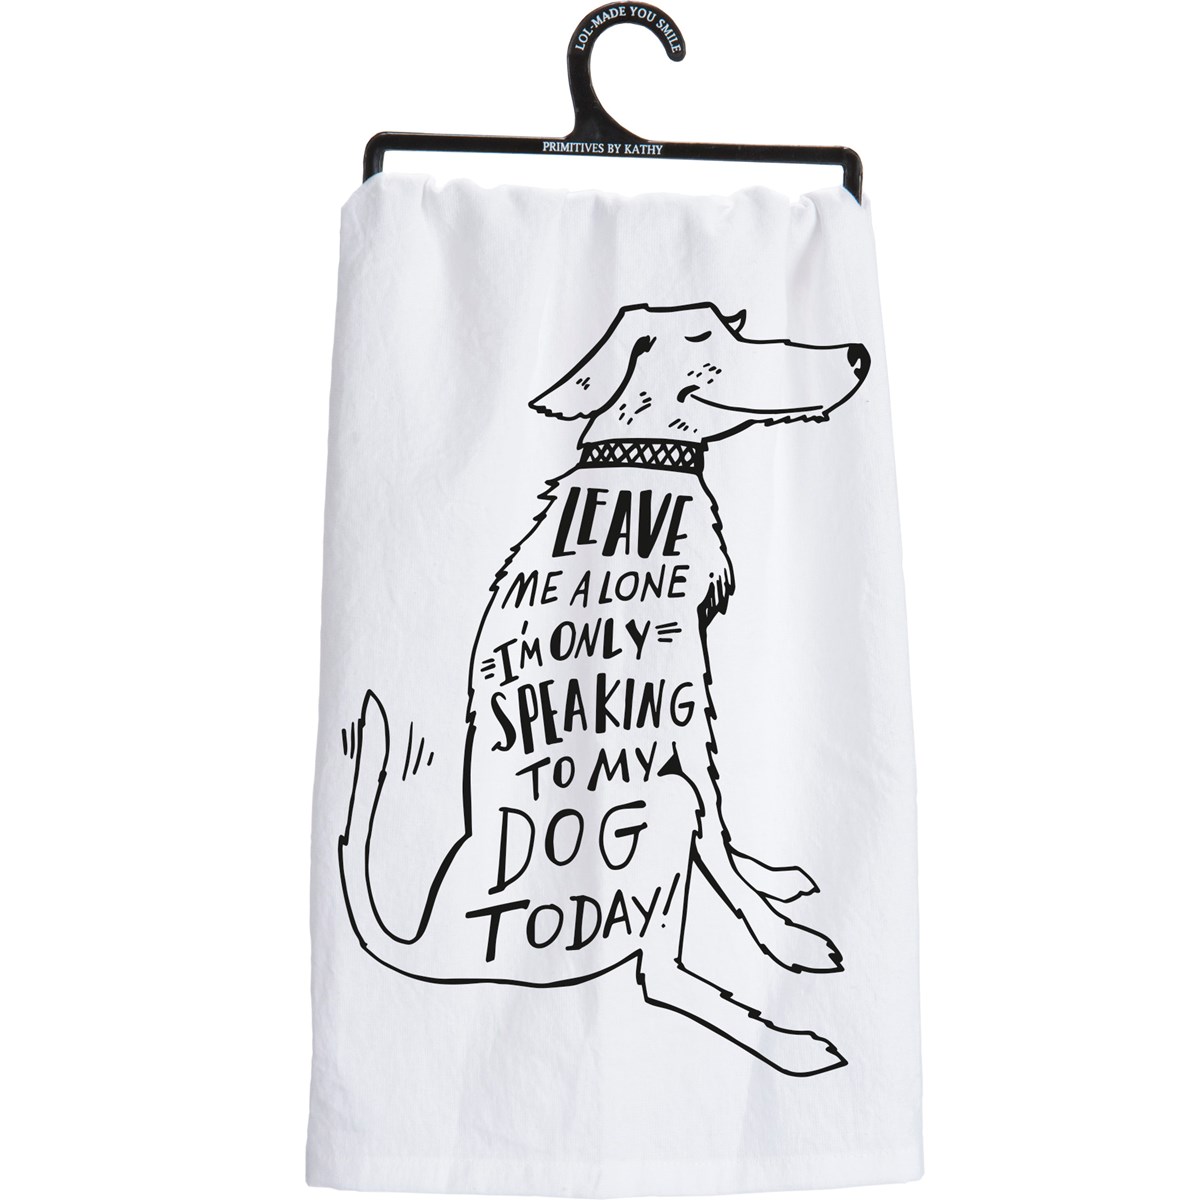 Only Speaking To My Dog Kitchen Towel - Cotton